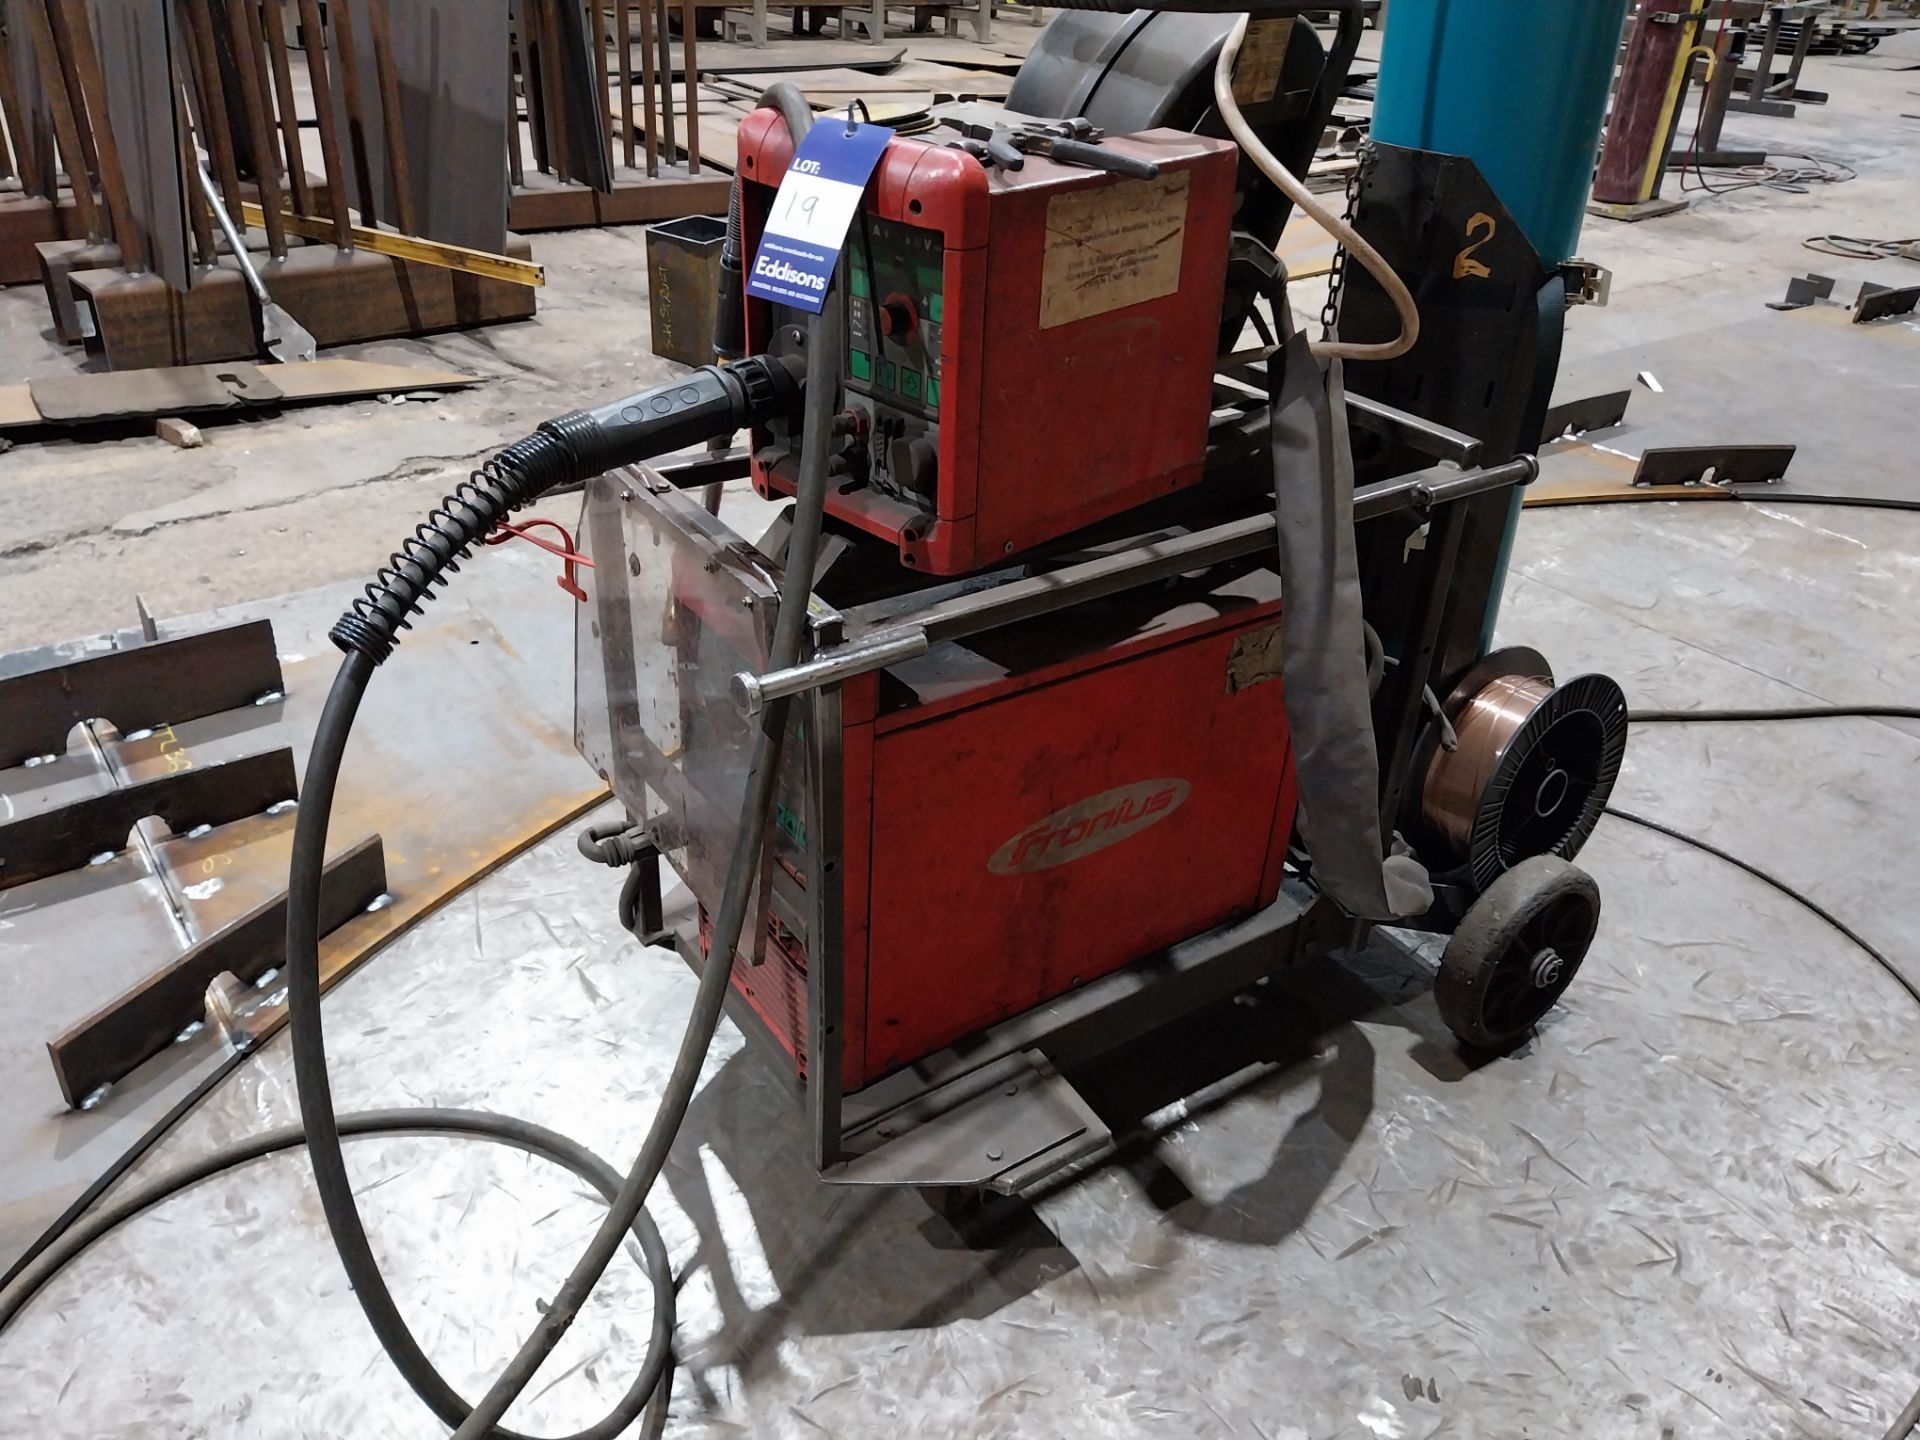 Fronius VR4000 4R/G/W/E mig welder with wire feed (bottle not included)